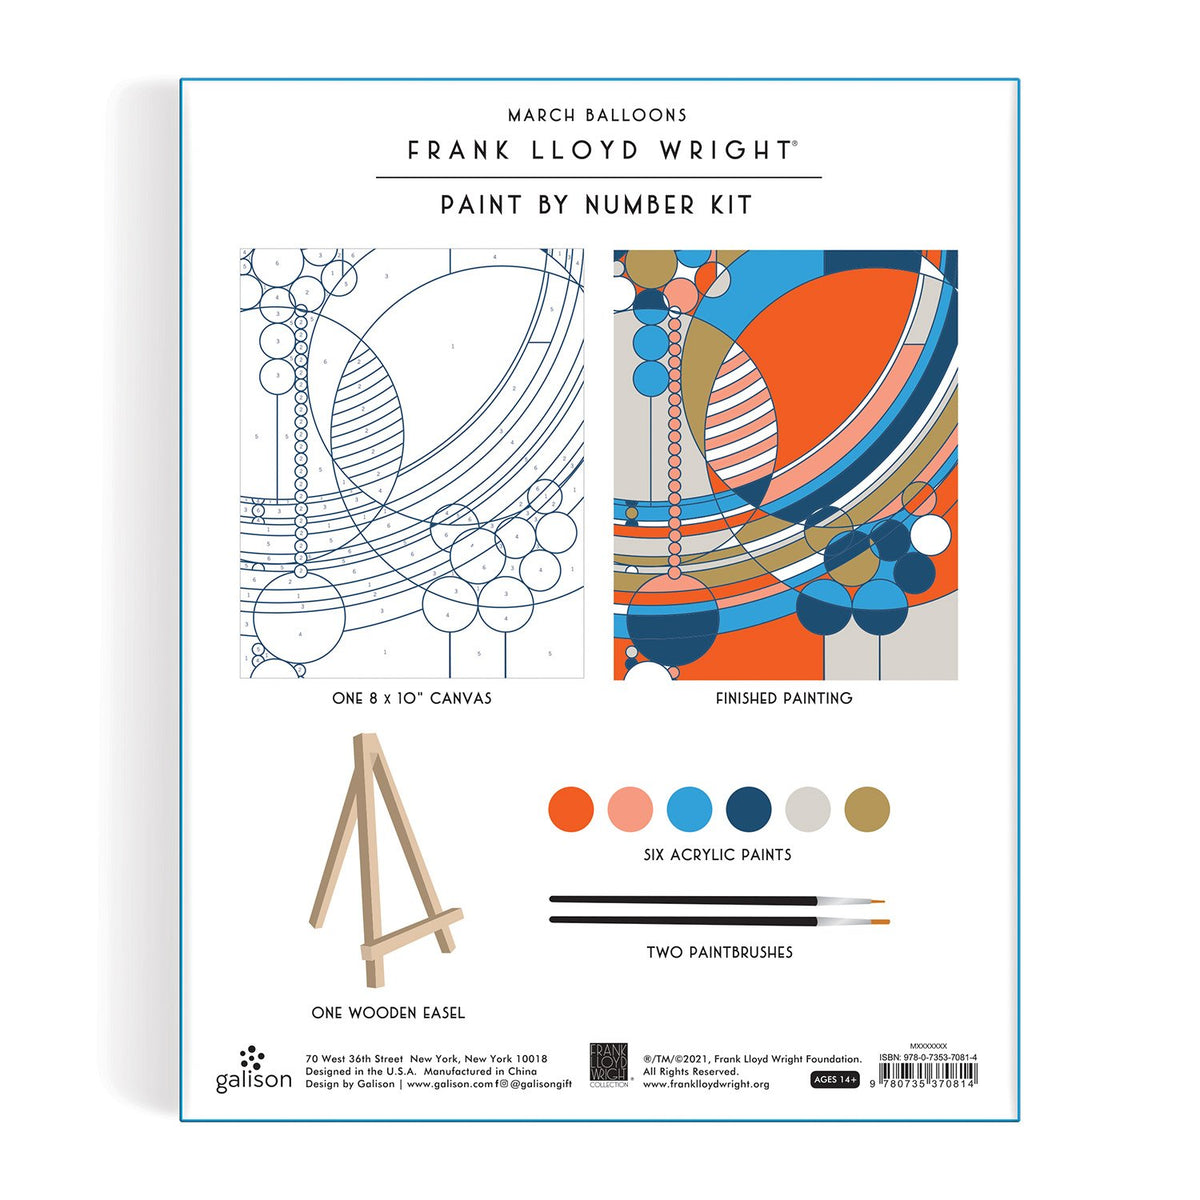 Frank Lloyd Wright March Balloons Paint By Number Kit Paint By Number Kits Frank Lloyd Wright 